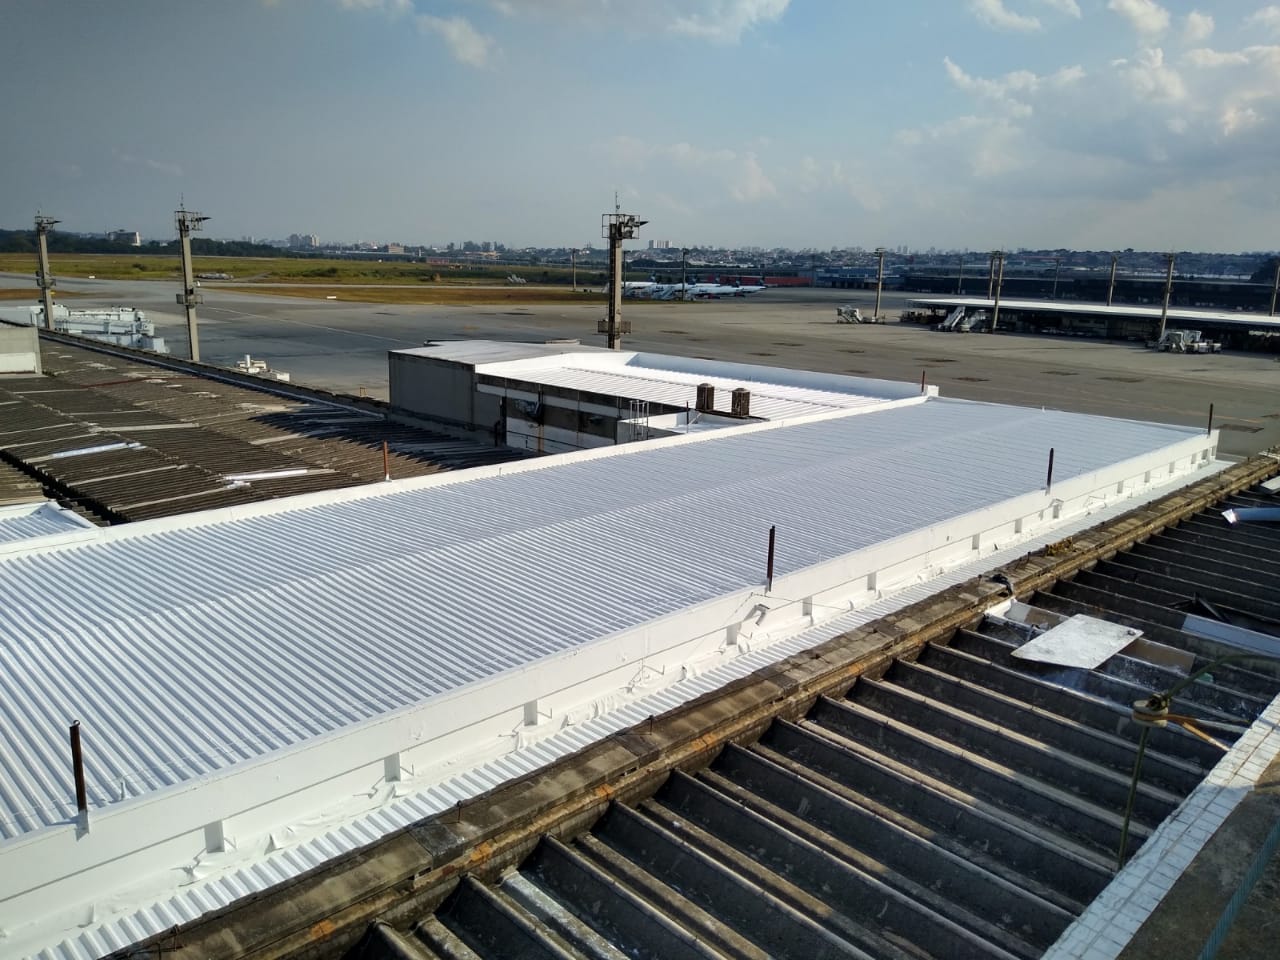 The COOL-R technology is a revolution on the roofing market